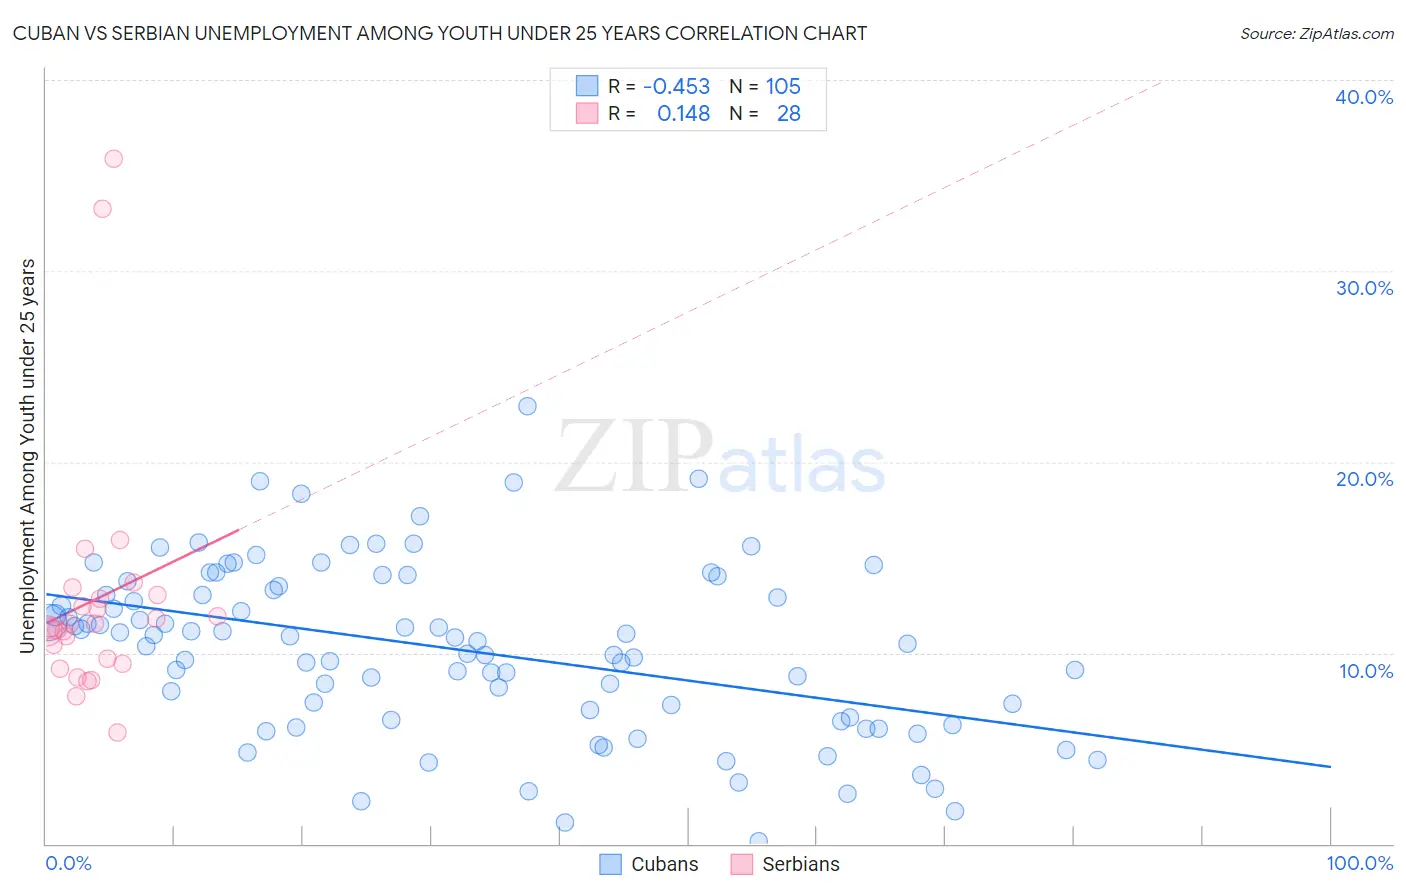 Cuban vs Serbian Unemployment Among Youth under 25 years